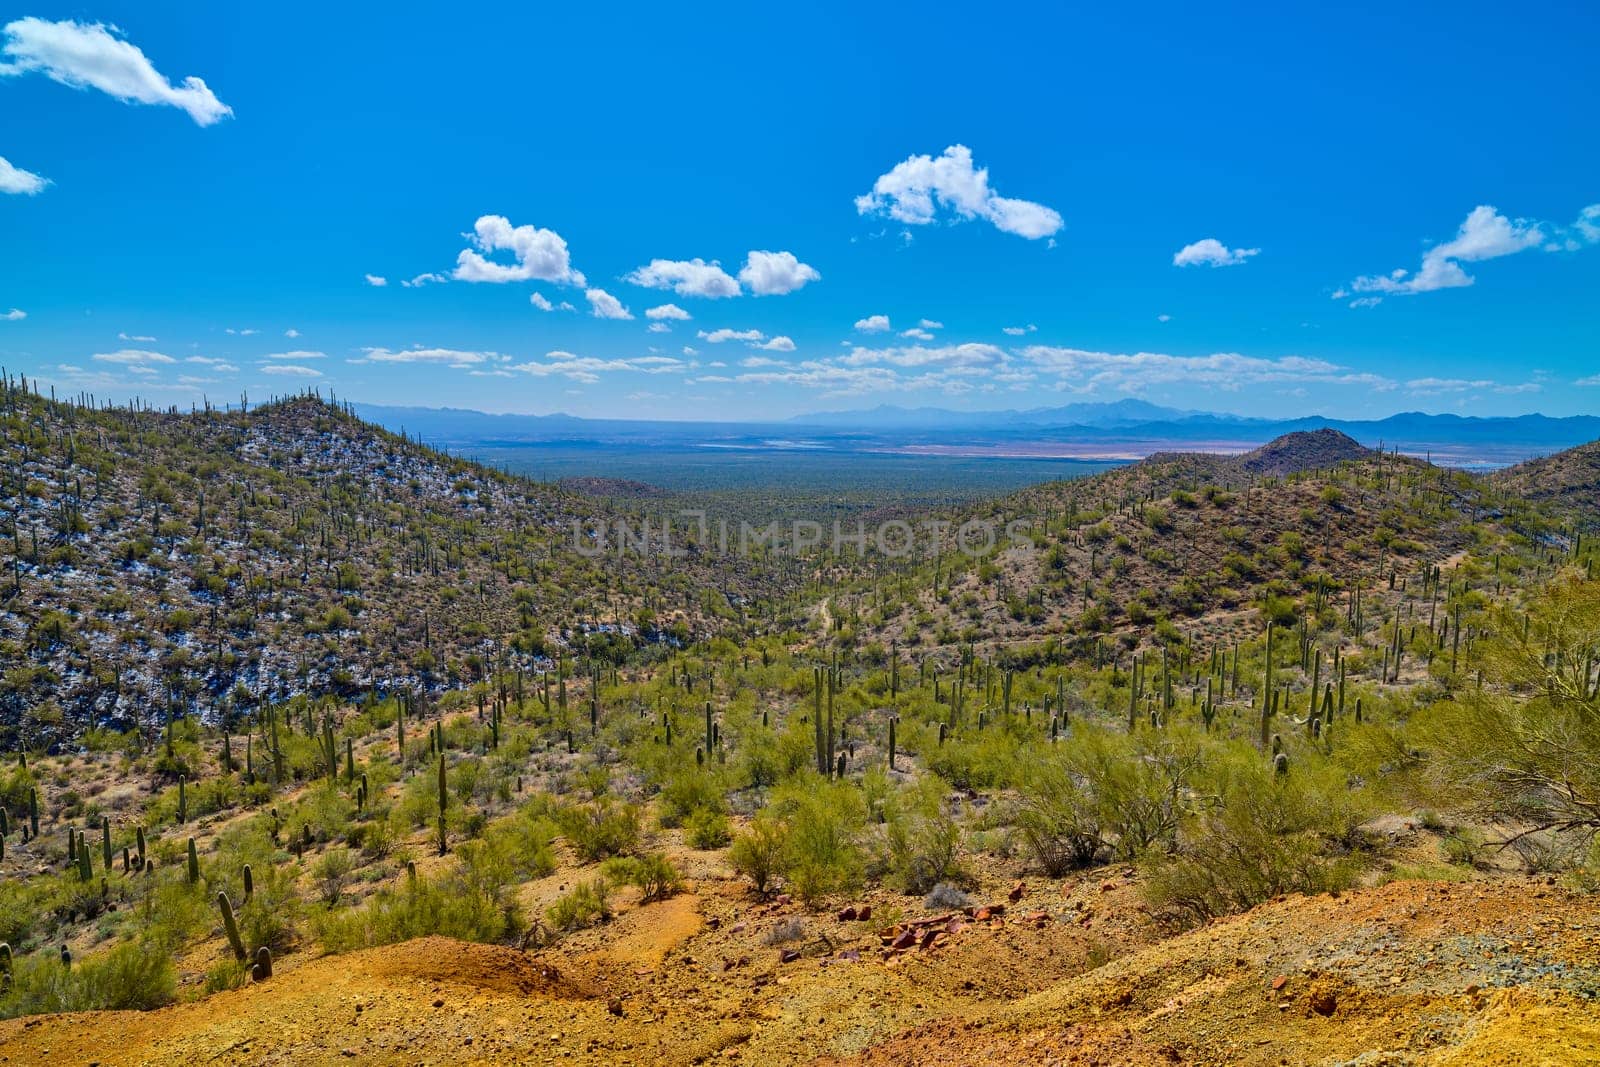 Views from Gould Mine in Saguaro National Park, Tucson Arizona.